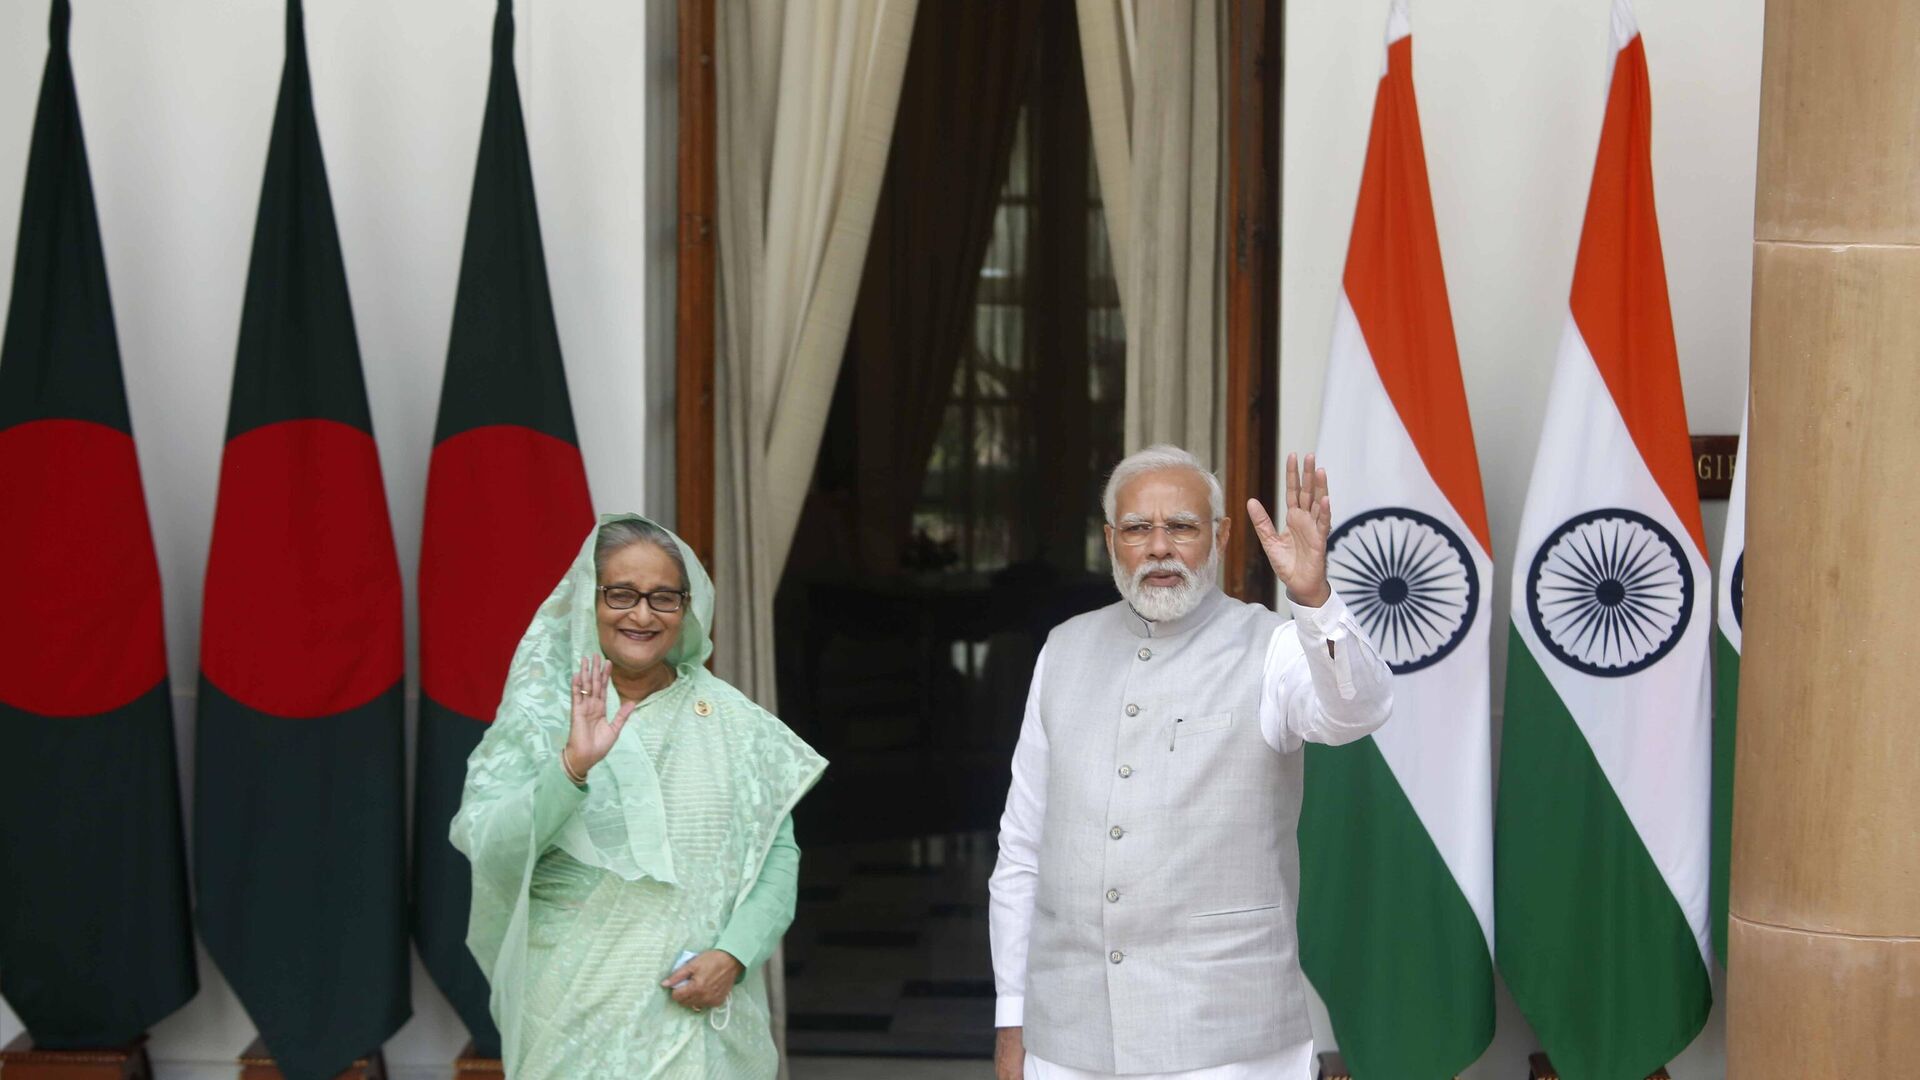 Indian Prime Minister Narendra Modi, right, and his Bangladeshi counterpart Sheikh Hasina wave to the waiting media before their delegation level talks in New Delhi, India, Tuesday, Sept. 6, 2022. The relationship between the neighbors is crucial, with India being Bangladesh’s largest trading partner in South Asia. While China is involved in almost all major infrastructure development schemes in Bangladesh, India is also more eager to take up joint projects. (AP Photo) - Sputnik India, 1920, 09.02.2024